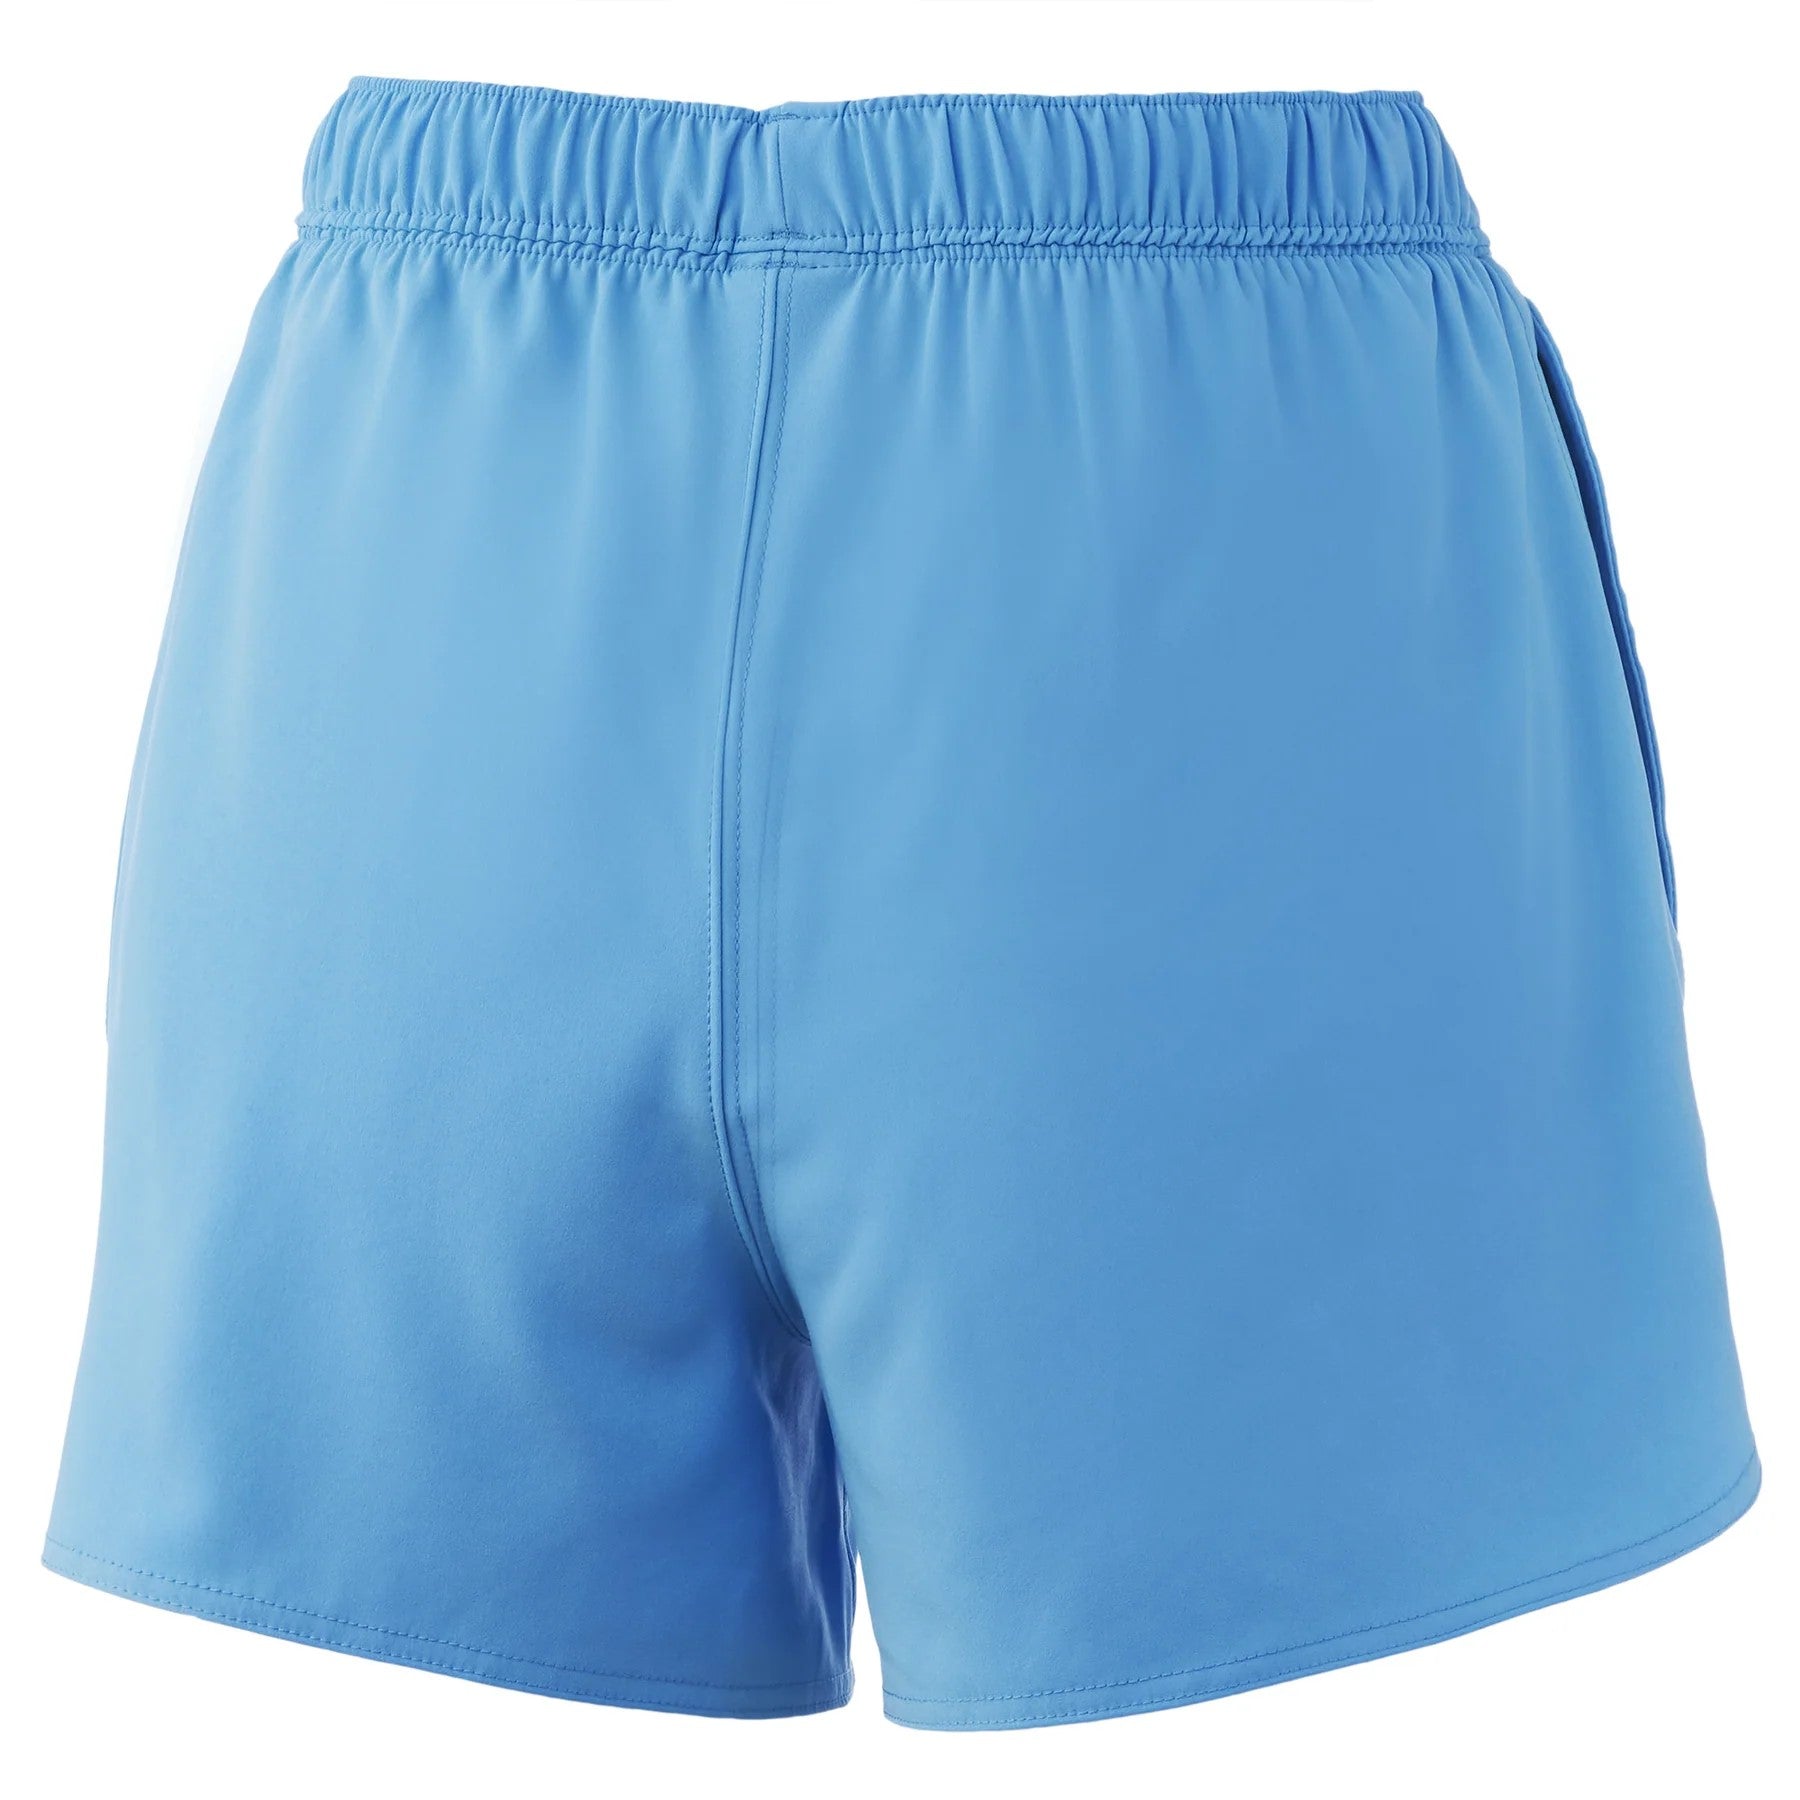 Huk Pursuit Volley Shorts Womens Aqua Blue - Compleat Angler Nedlands Pro  Tackle